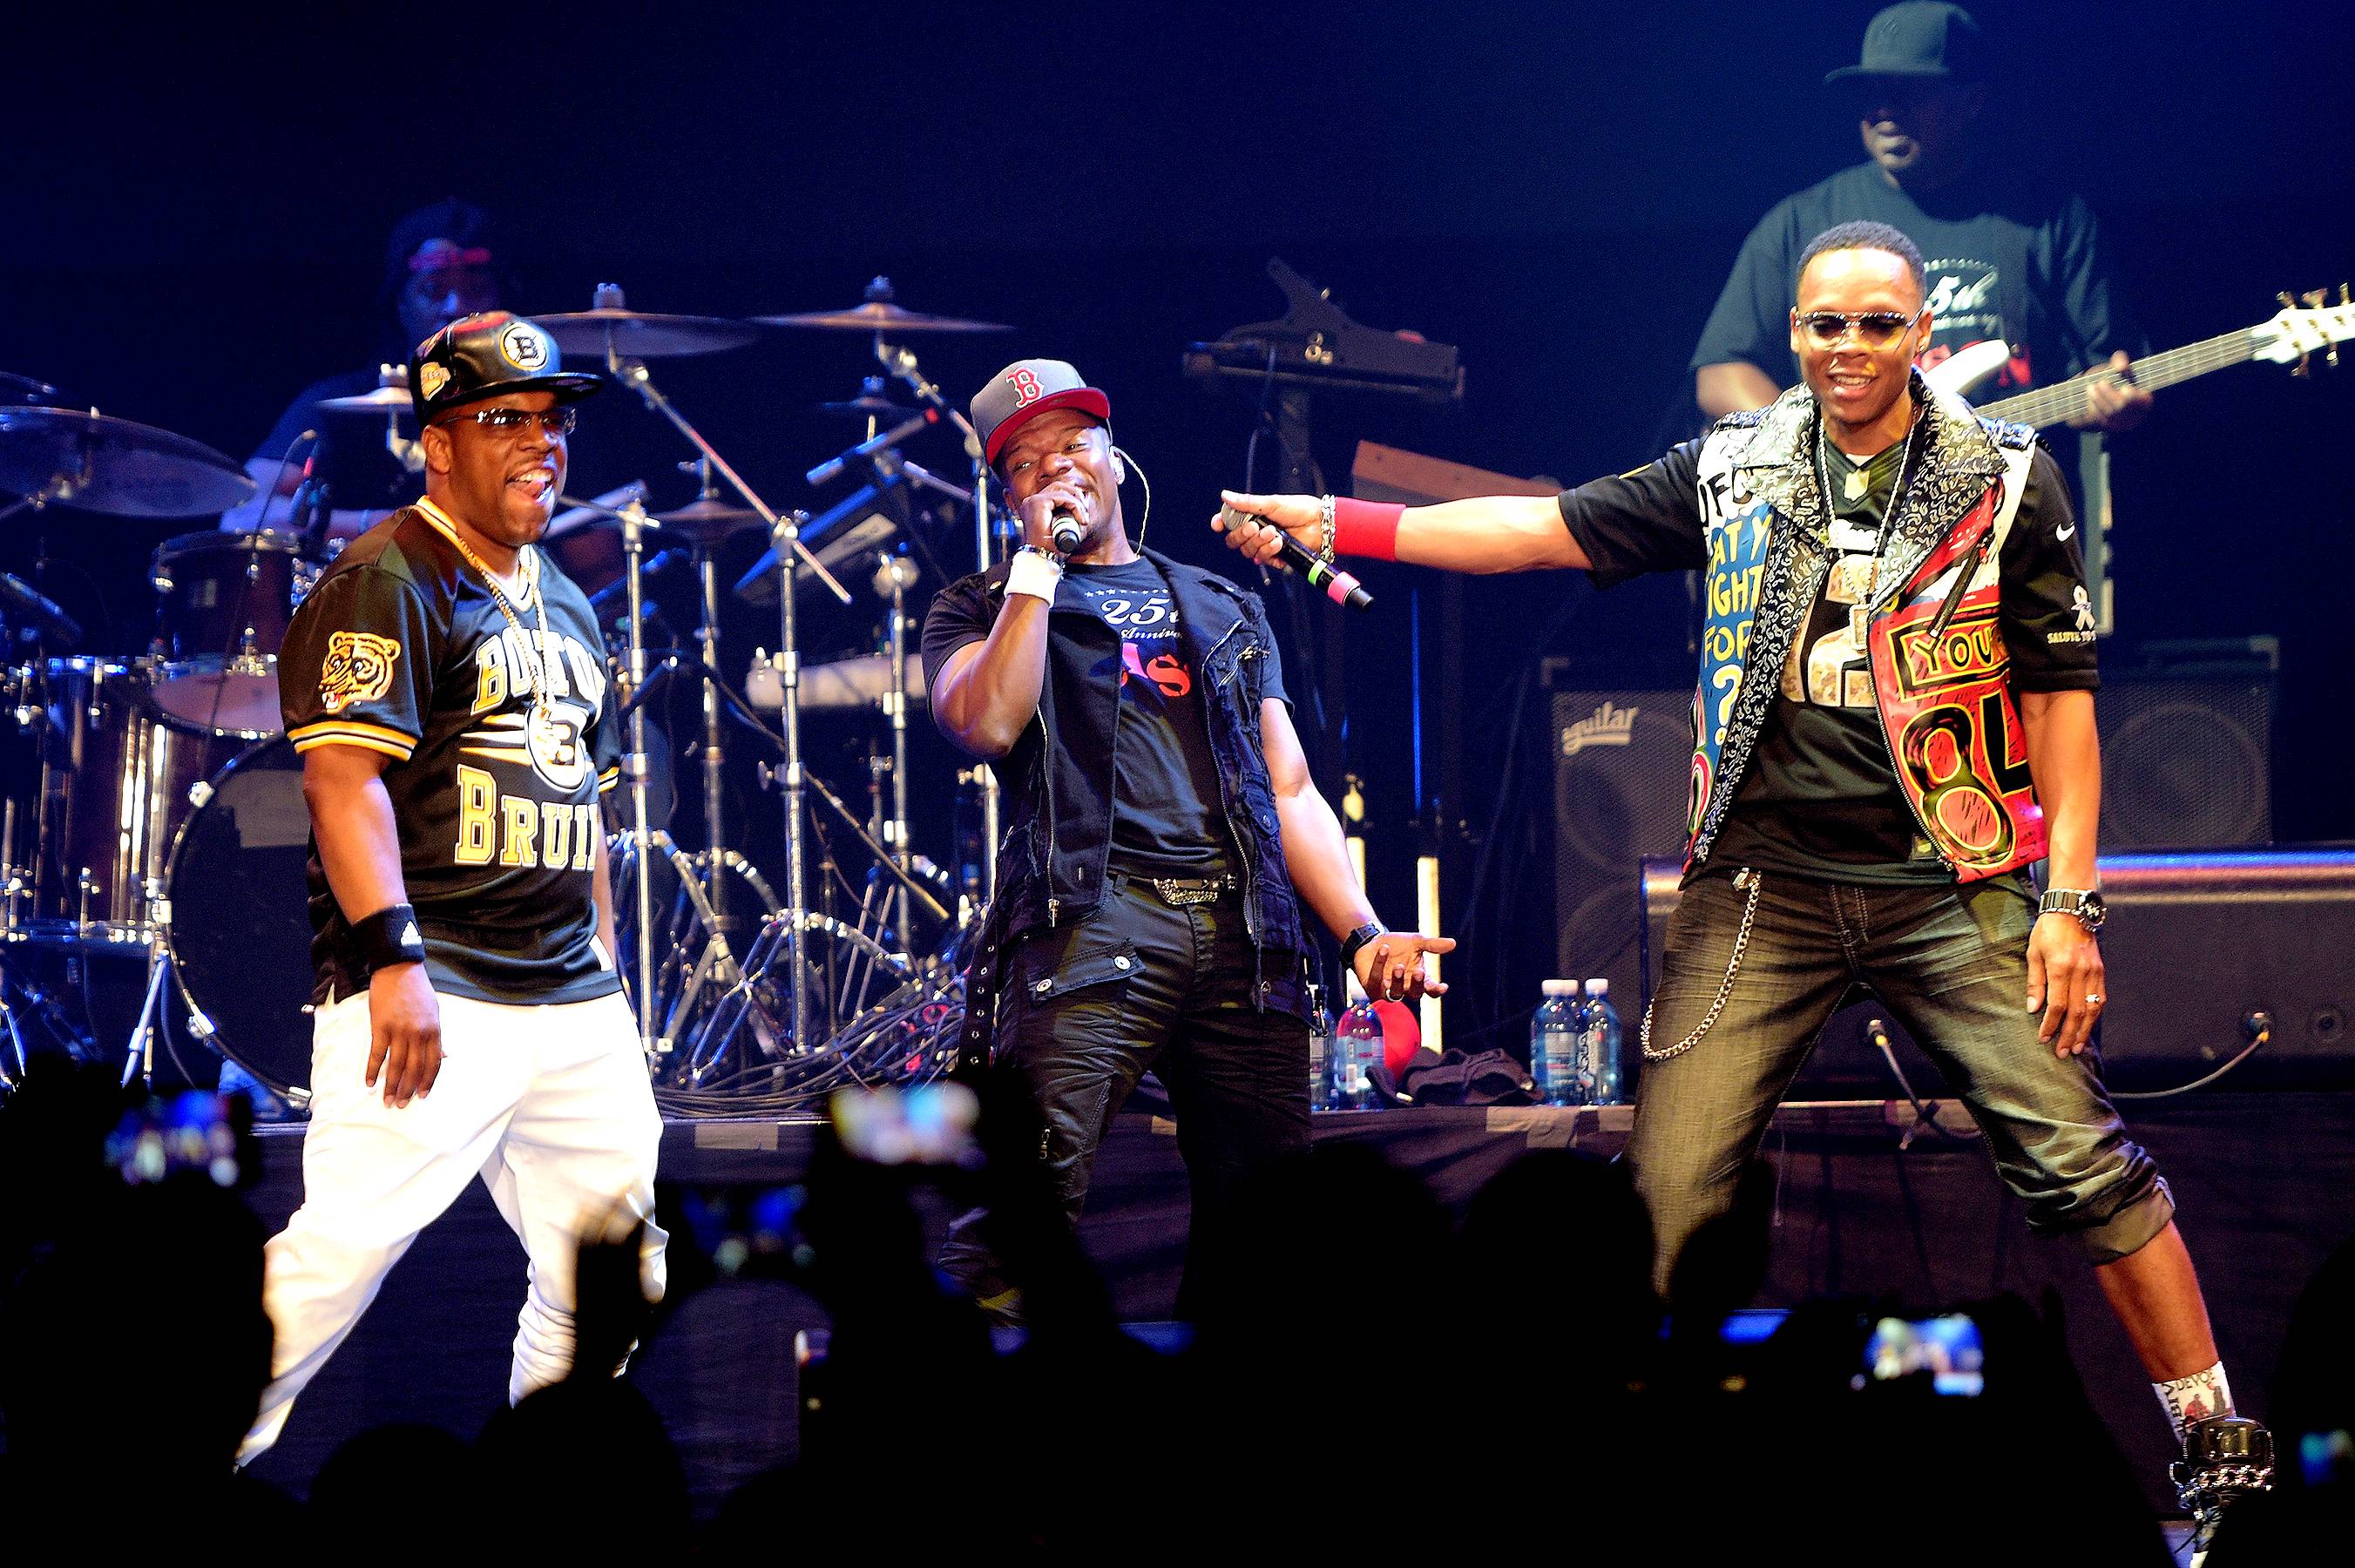 Bell Biv DeVoe's 25th Anniversary  - Bell Biv DeVoe has rocked our world for years with their new jack swing style music. What more do they have in store for us this year?! (Photo: Jason Kempin/BET/Getty Images for BET)